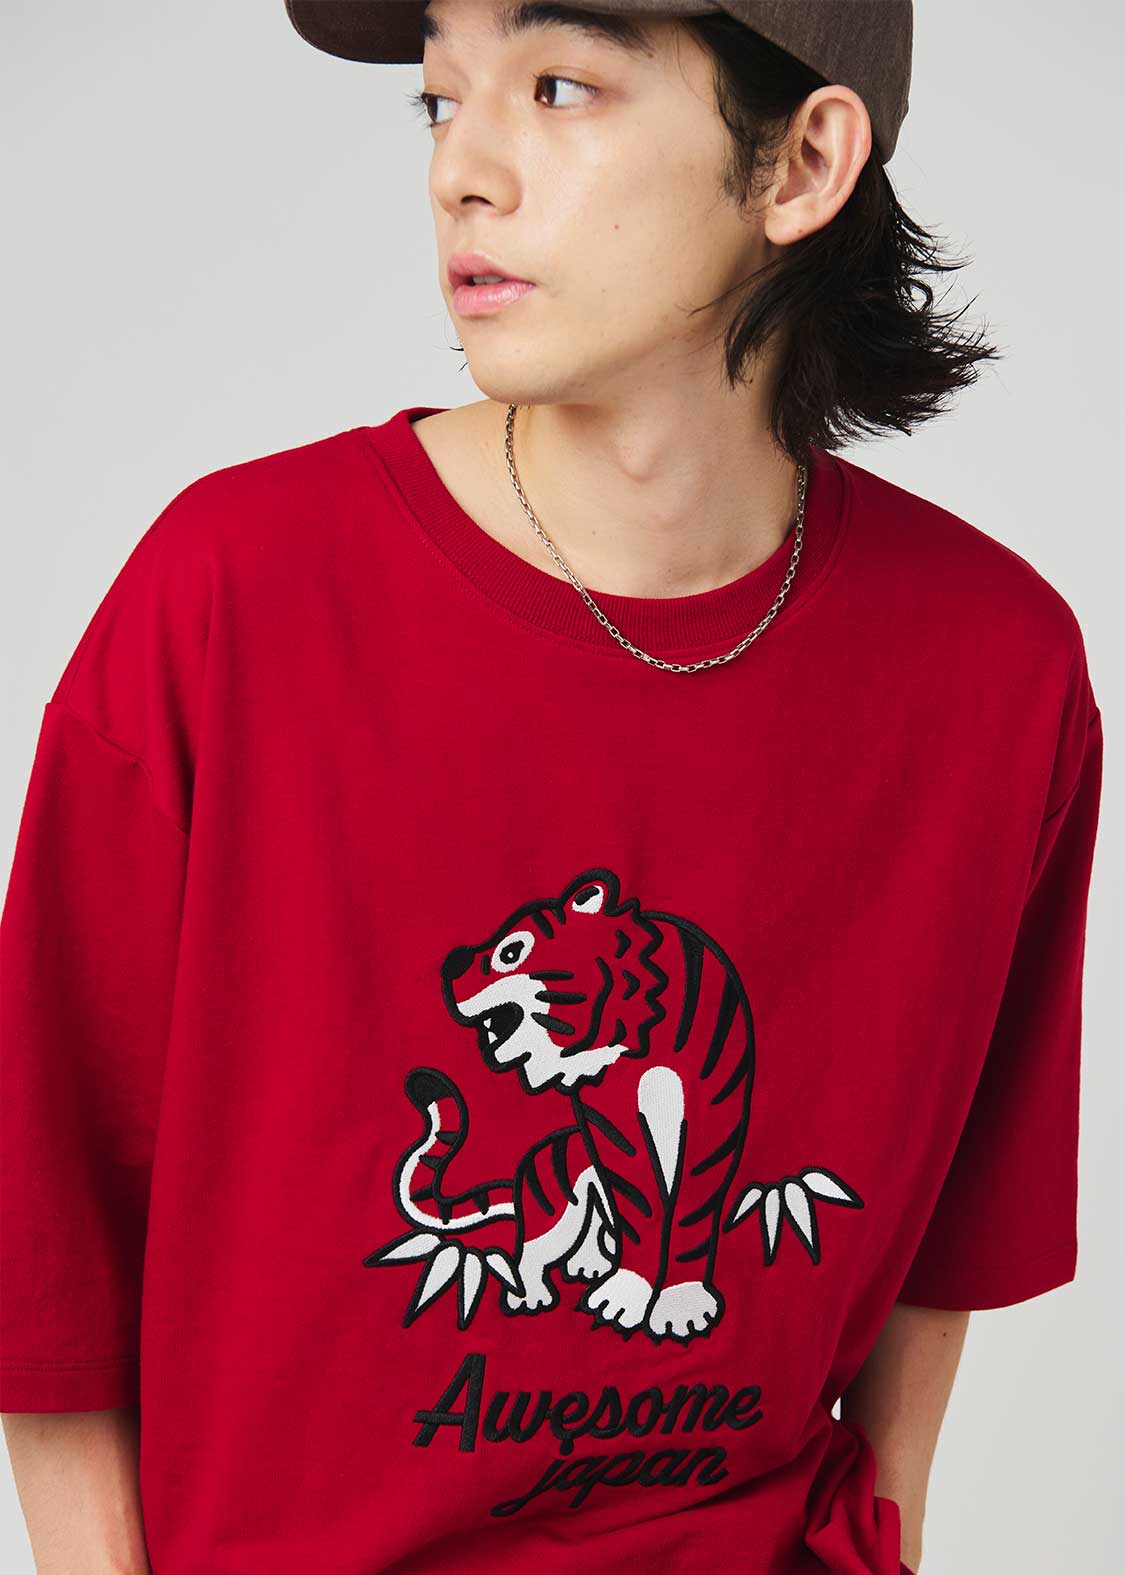 Big Silhouette Half Sleeve Sweat (Awesome Tiger Standing)